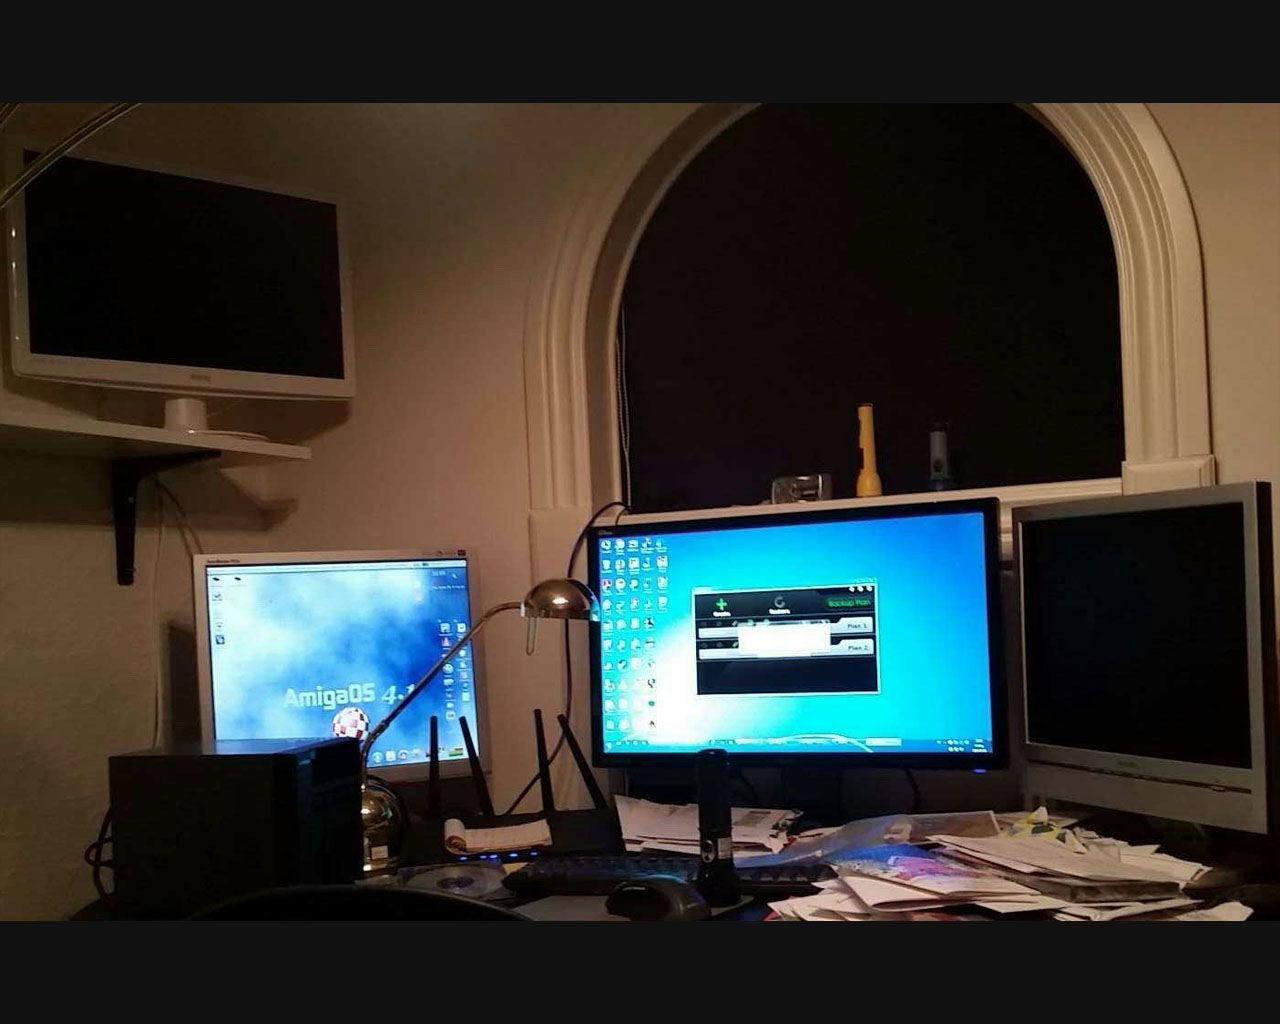 My battlestation-AOS4.1, Win7 and WinXP (and NAS and router)